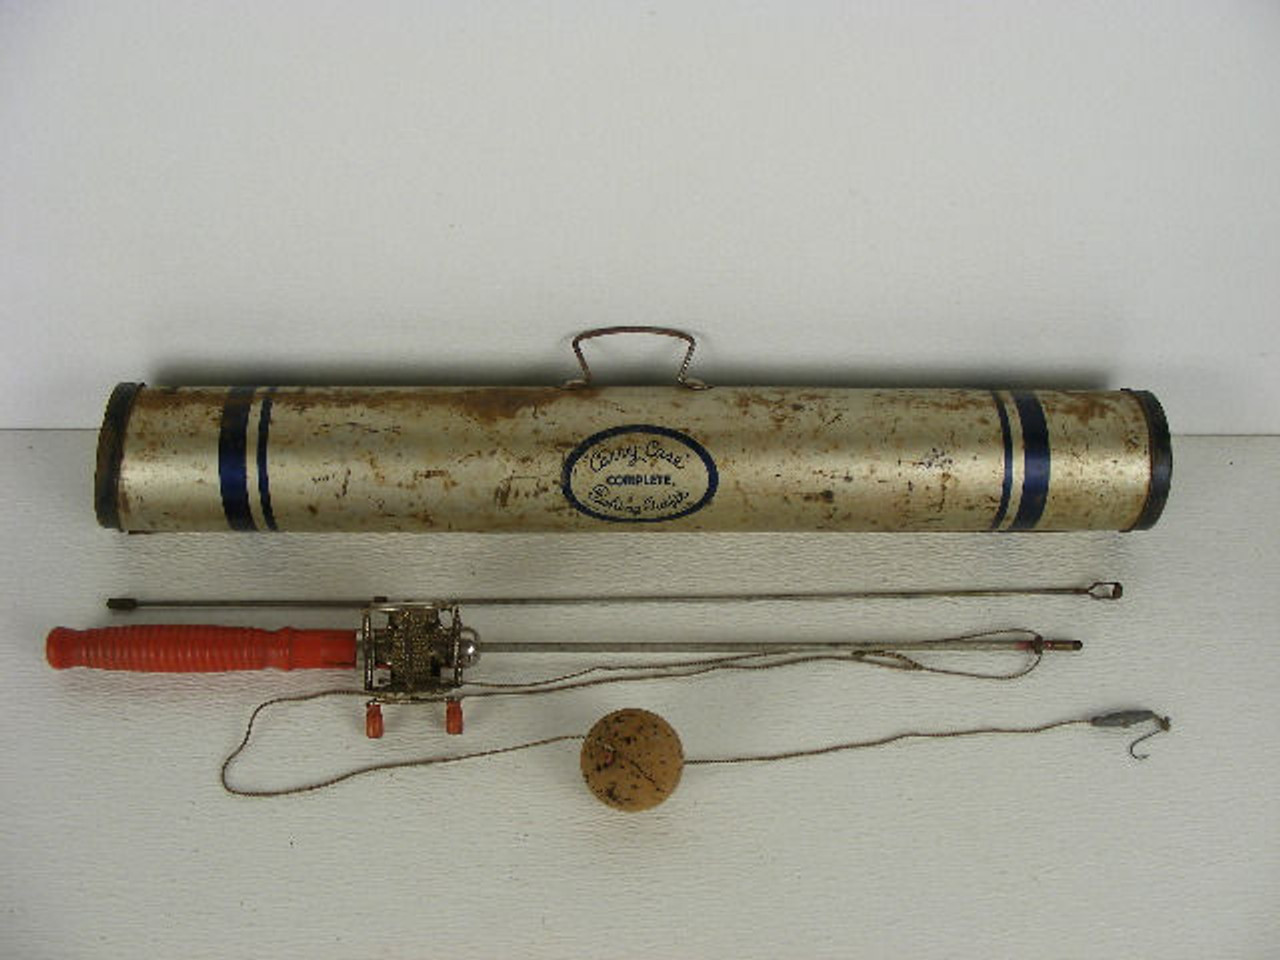 This is a rare old portable breakdown fishing pole that comes in